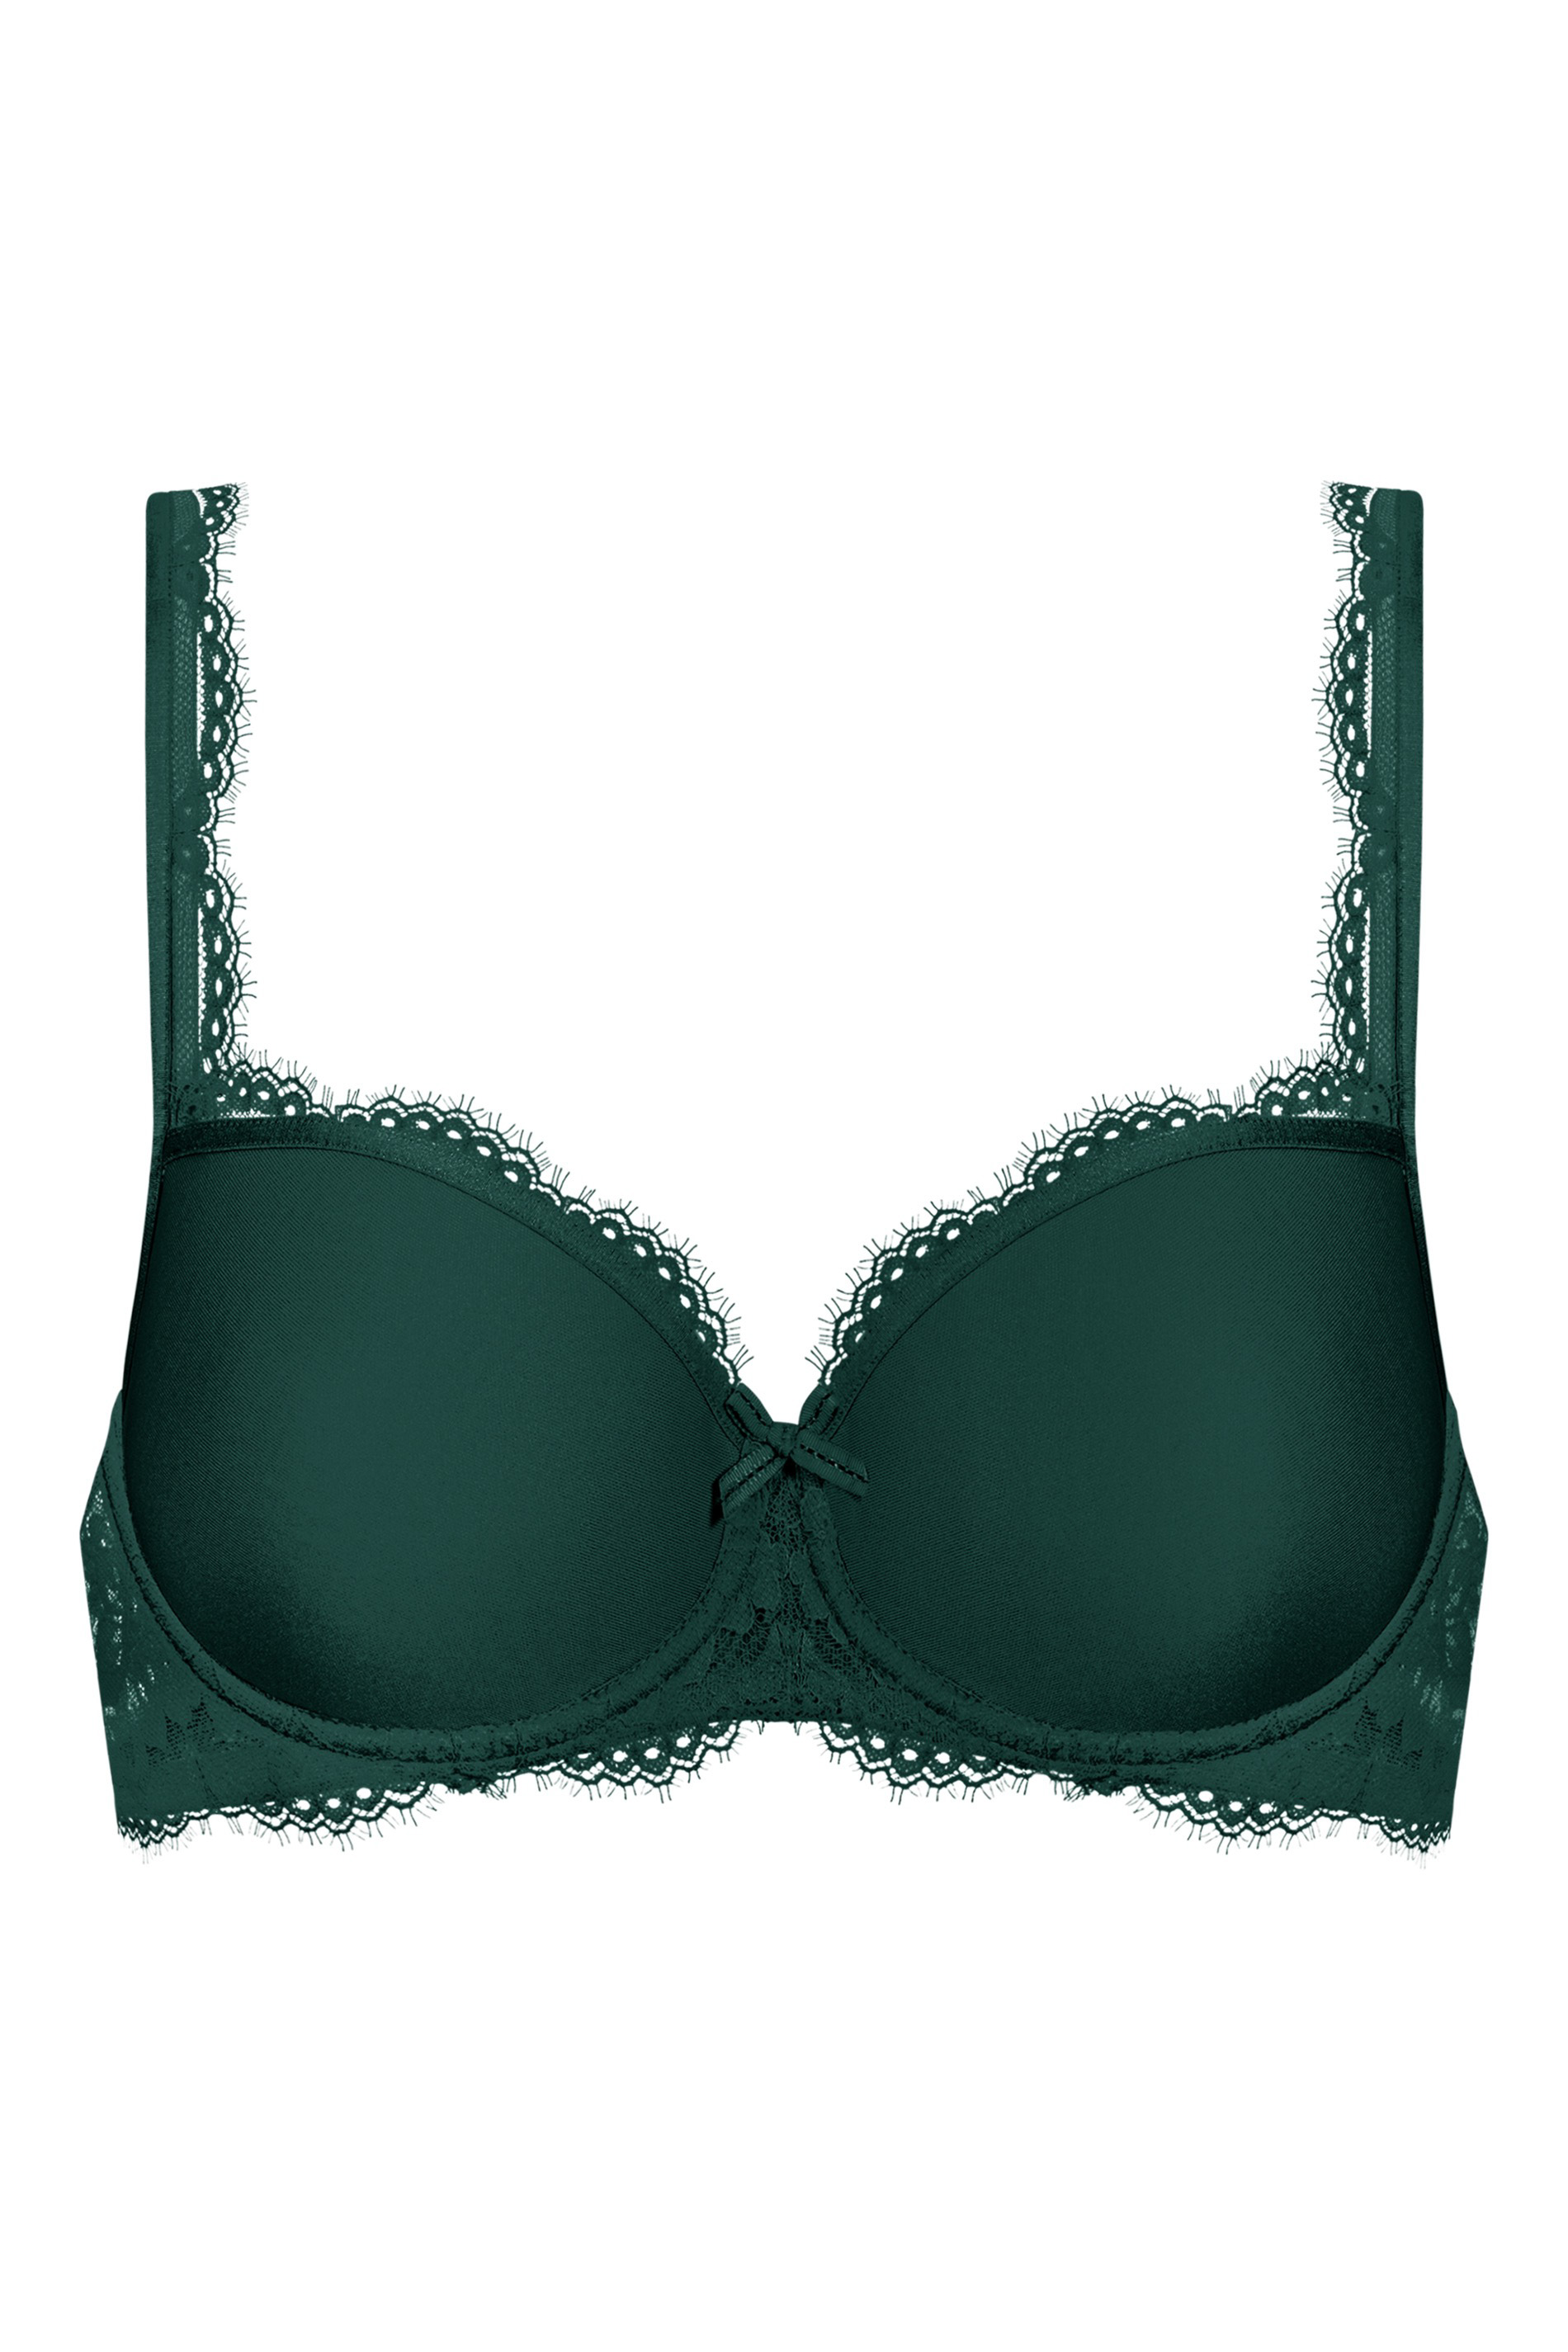 Spacer bra | Half Cup Serie Amazing Cut Out | mey®